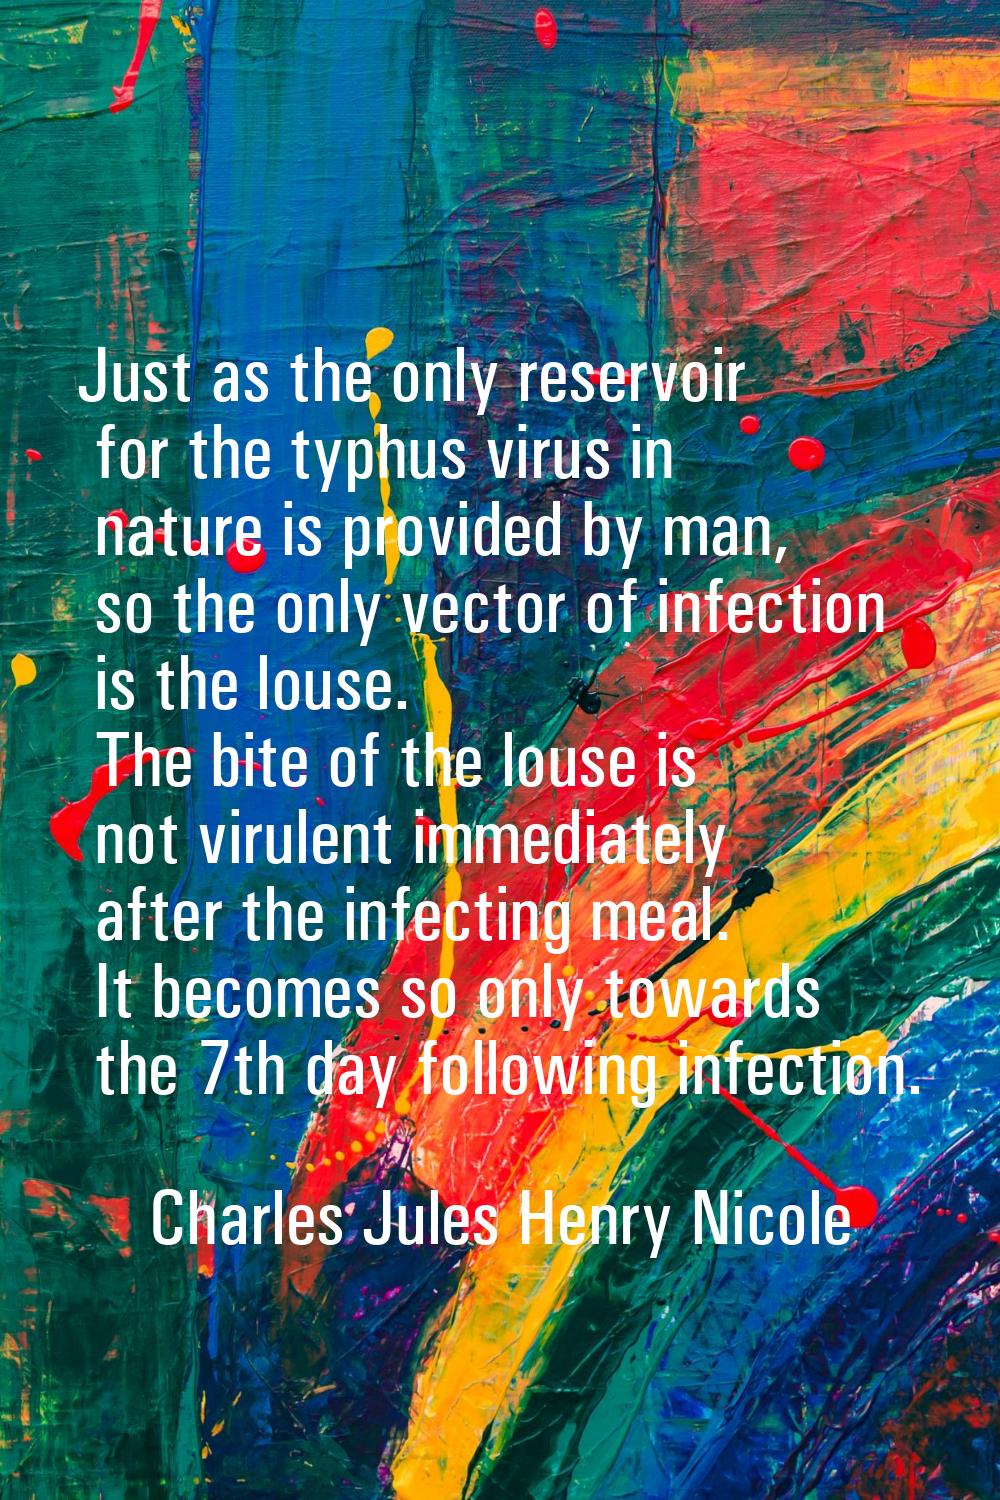 Just as the only reservoir for the typhus virus in nature is provided by man, so the only vector of